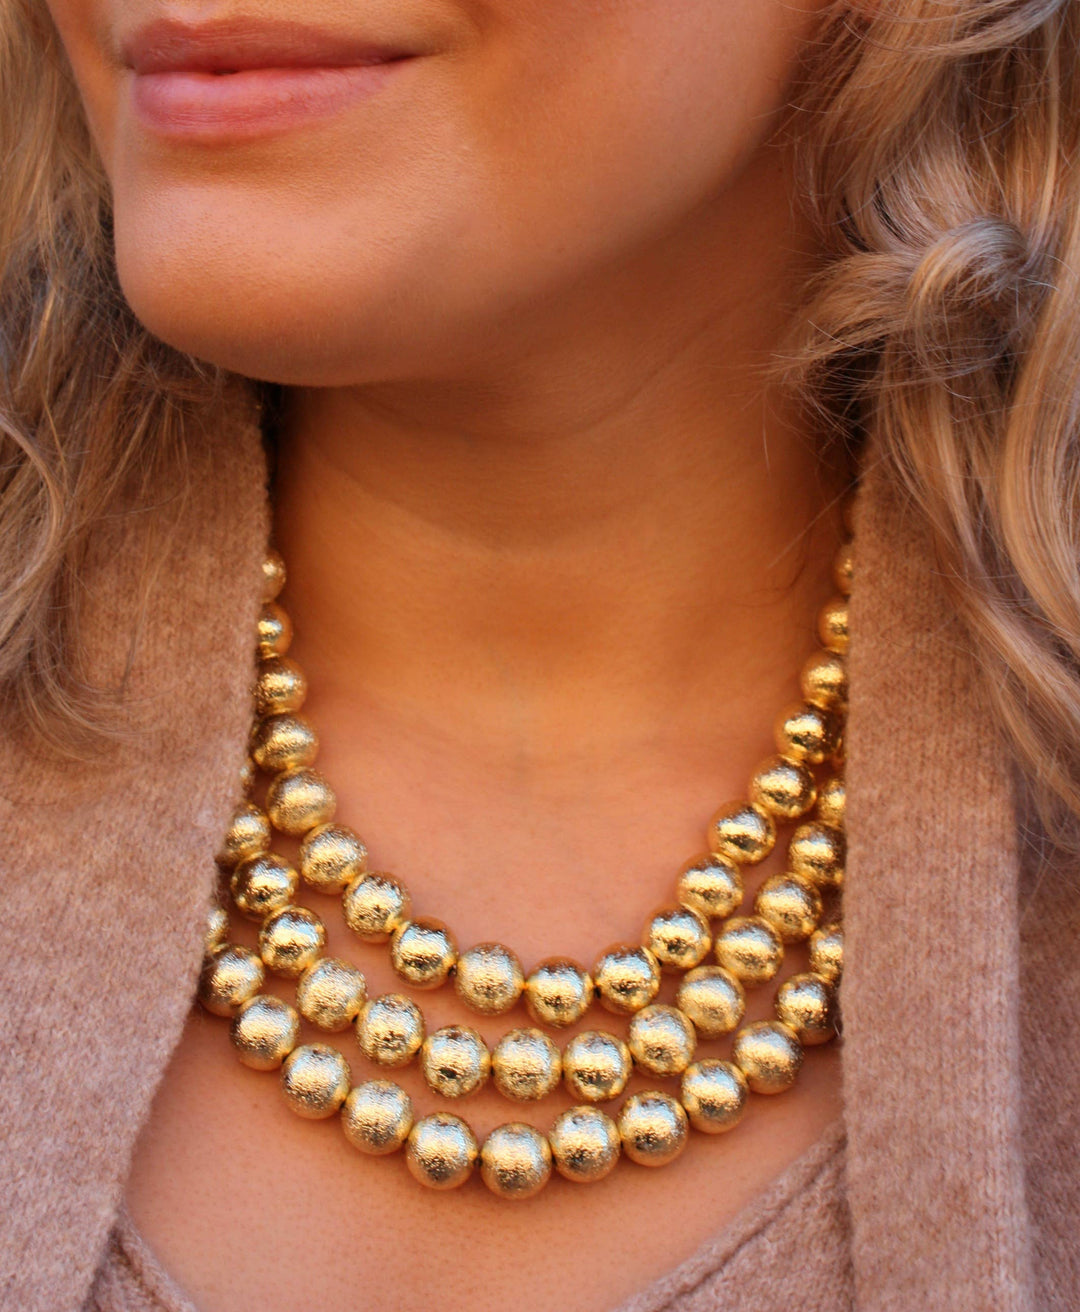 Accessory Concierge - Brushed Metal Bead Necklace